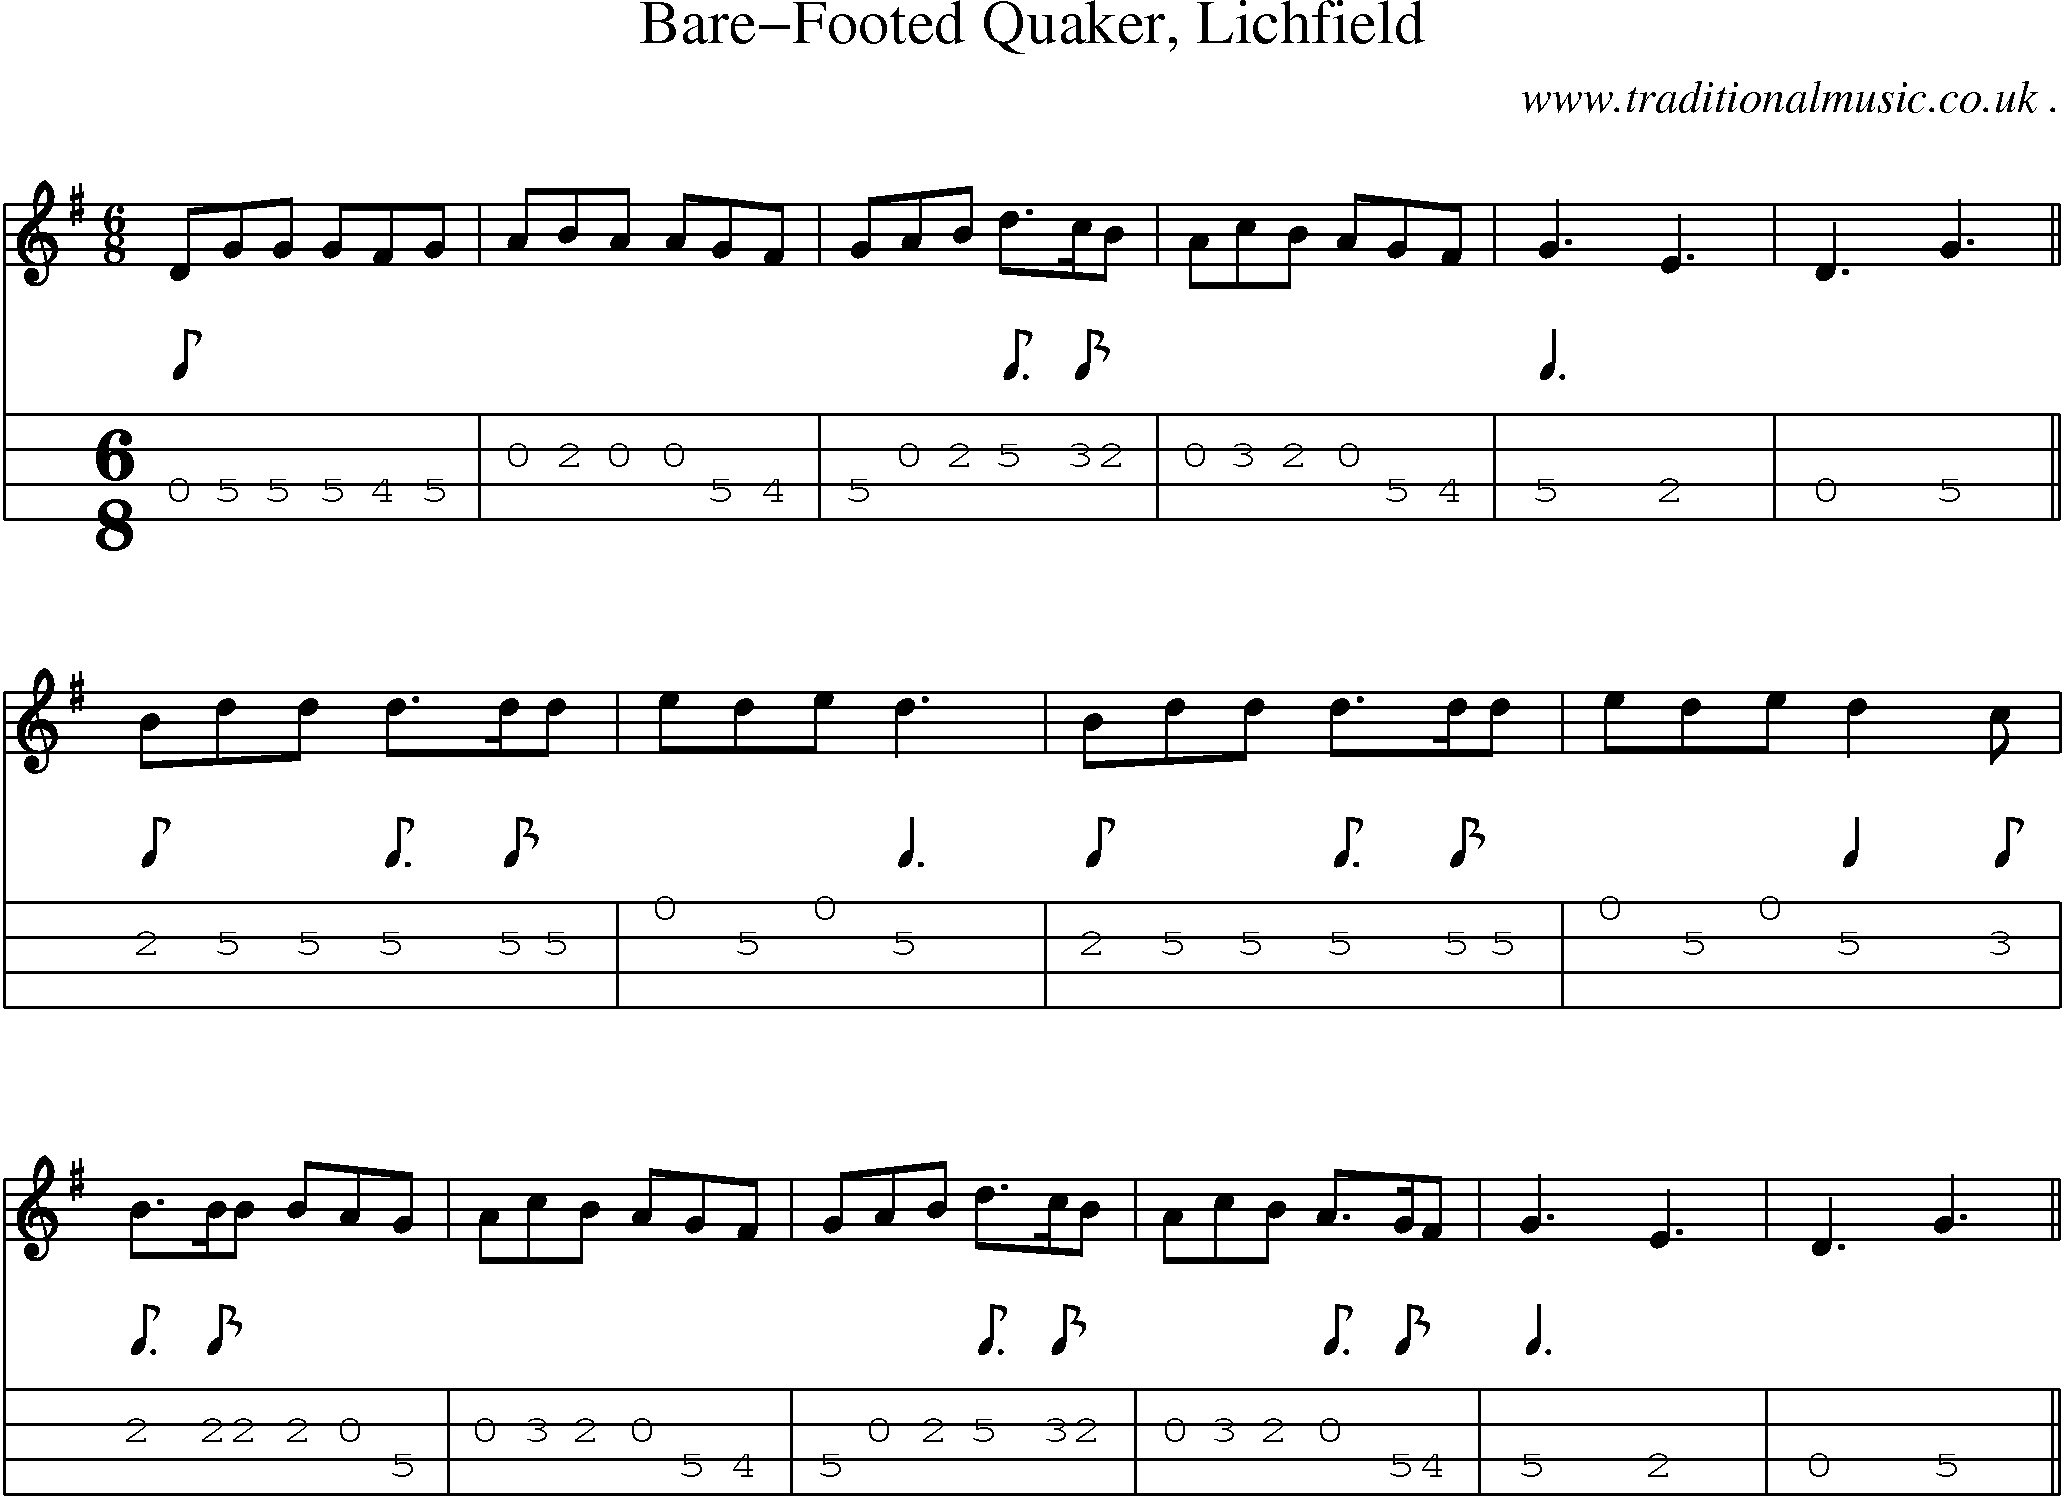 Sheet-Music and Mandolin Tabs for Bare-footed Quaker Lichfield